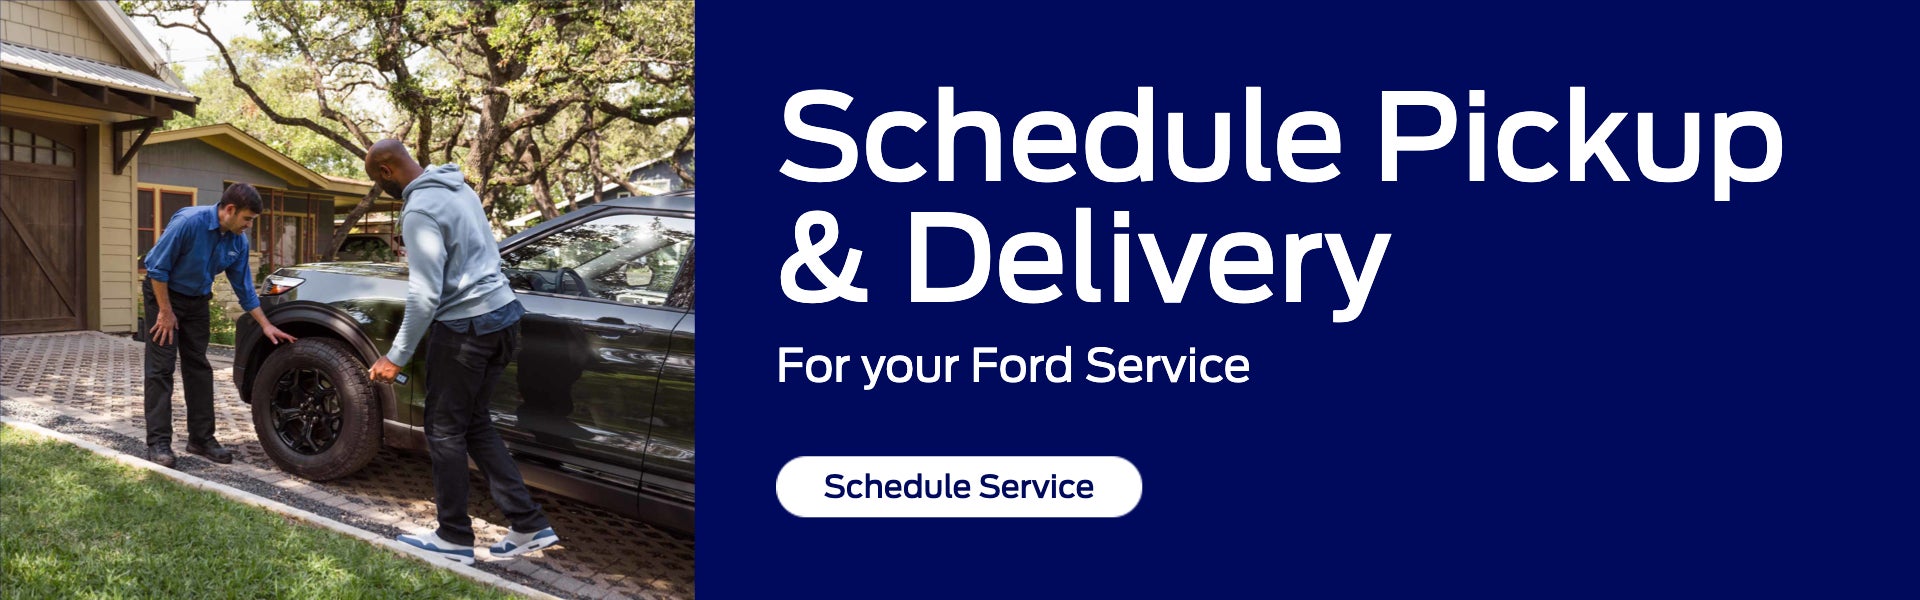 Schedule Pickup & Delivery